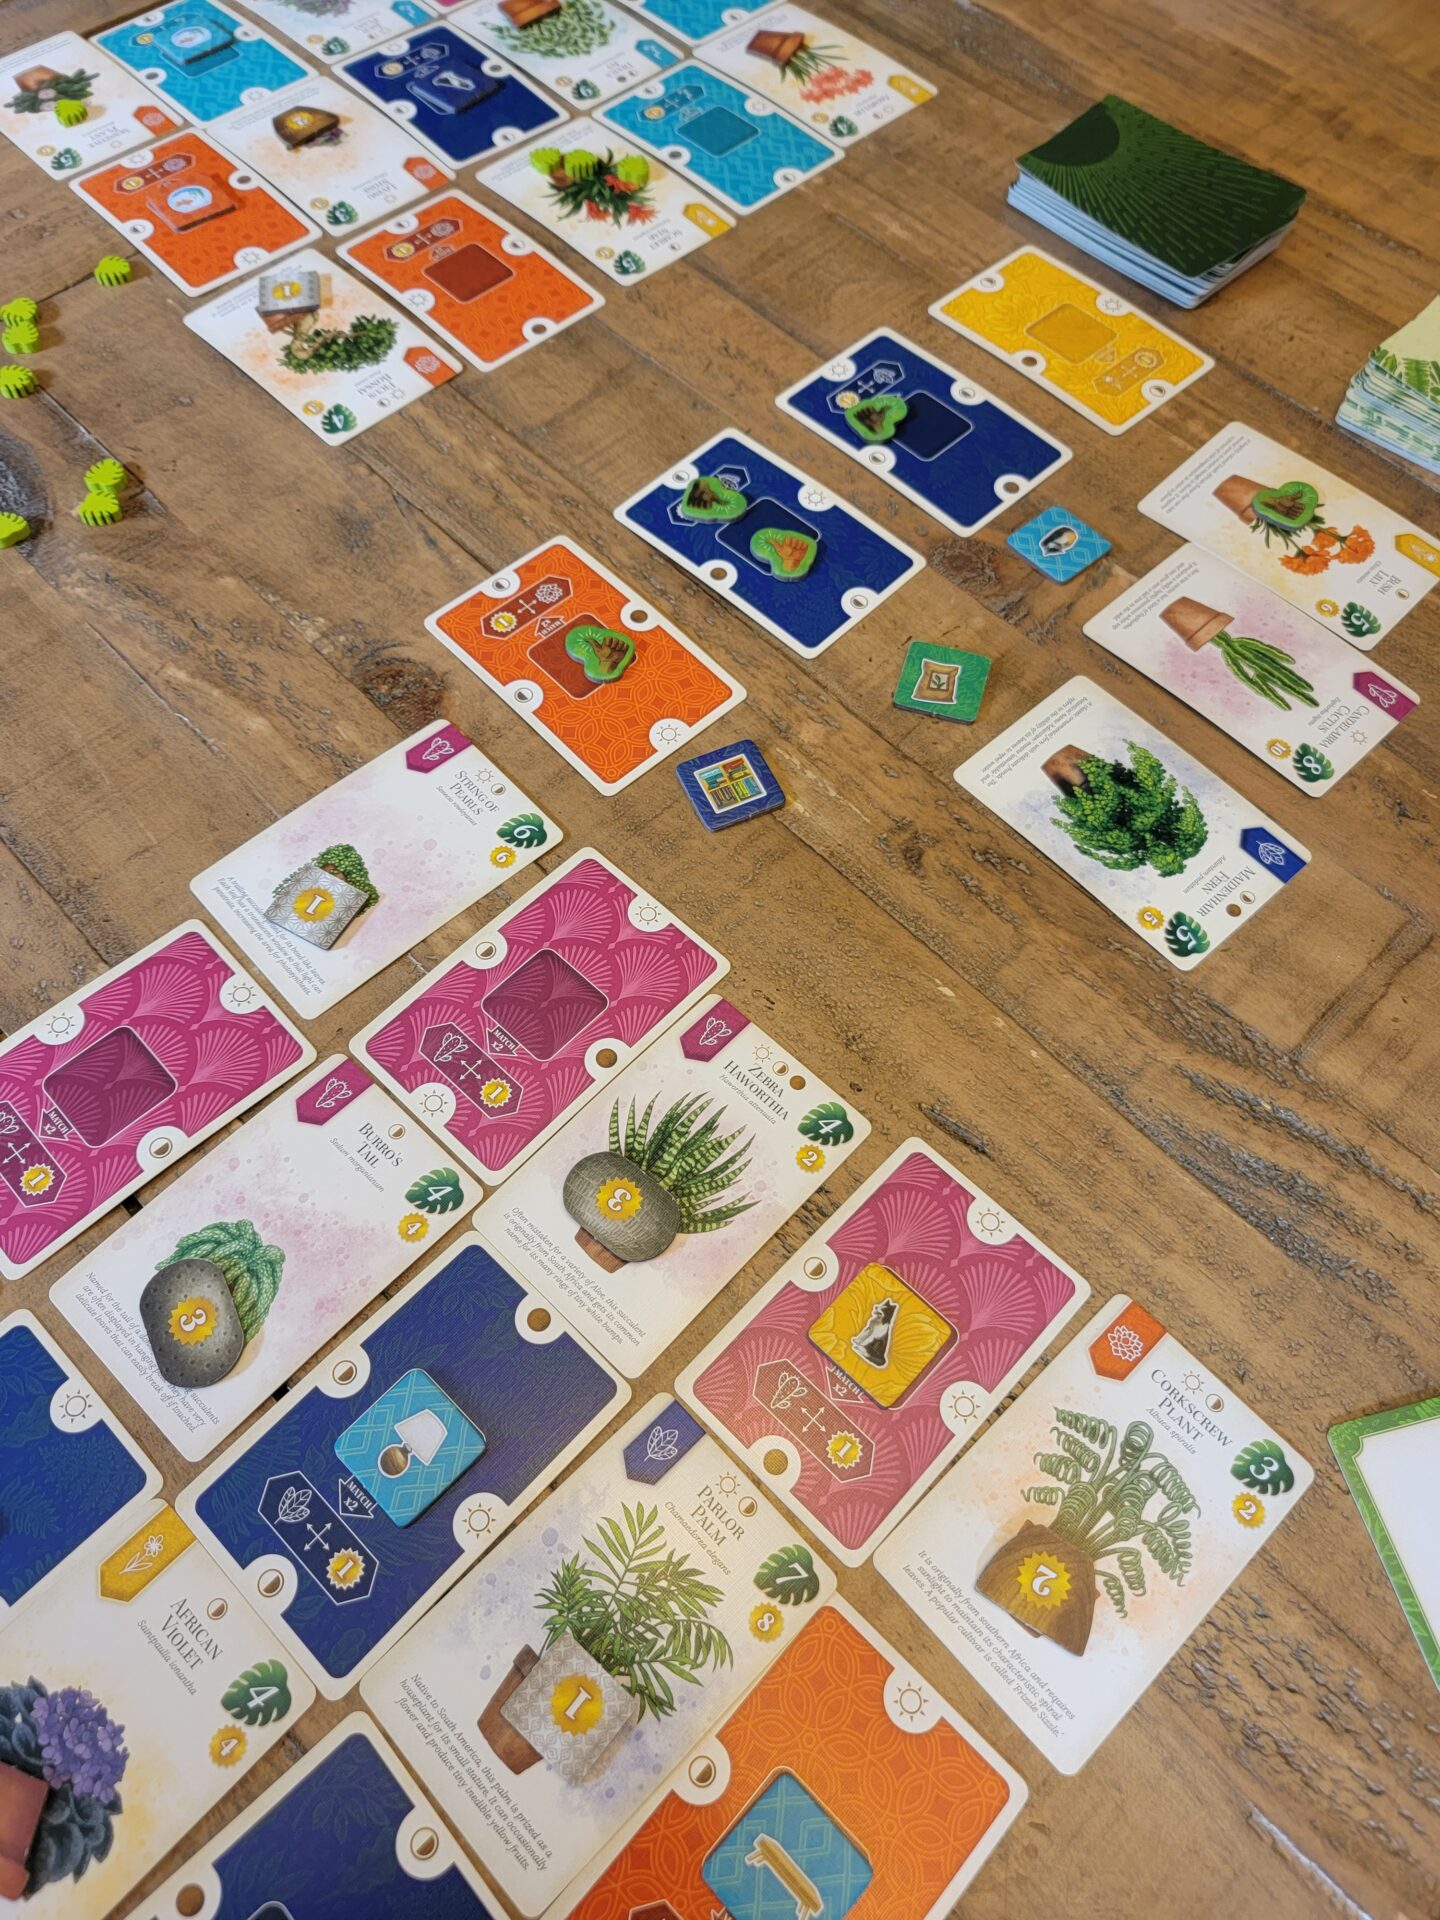 verdant board game being played